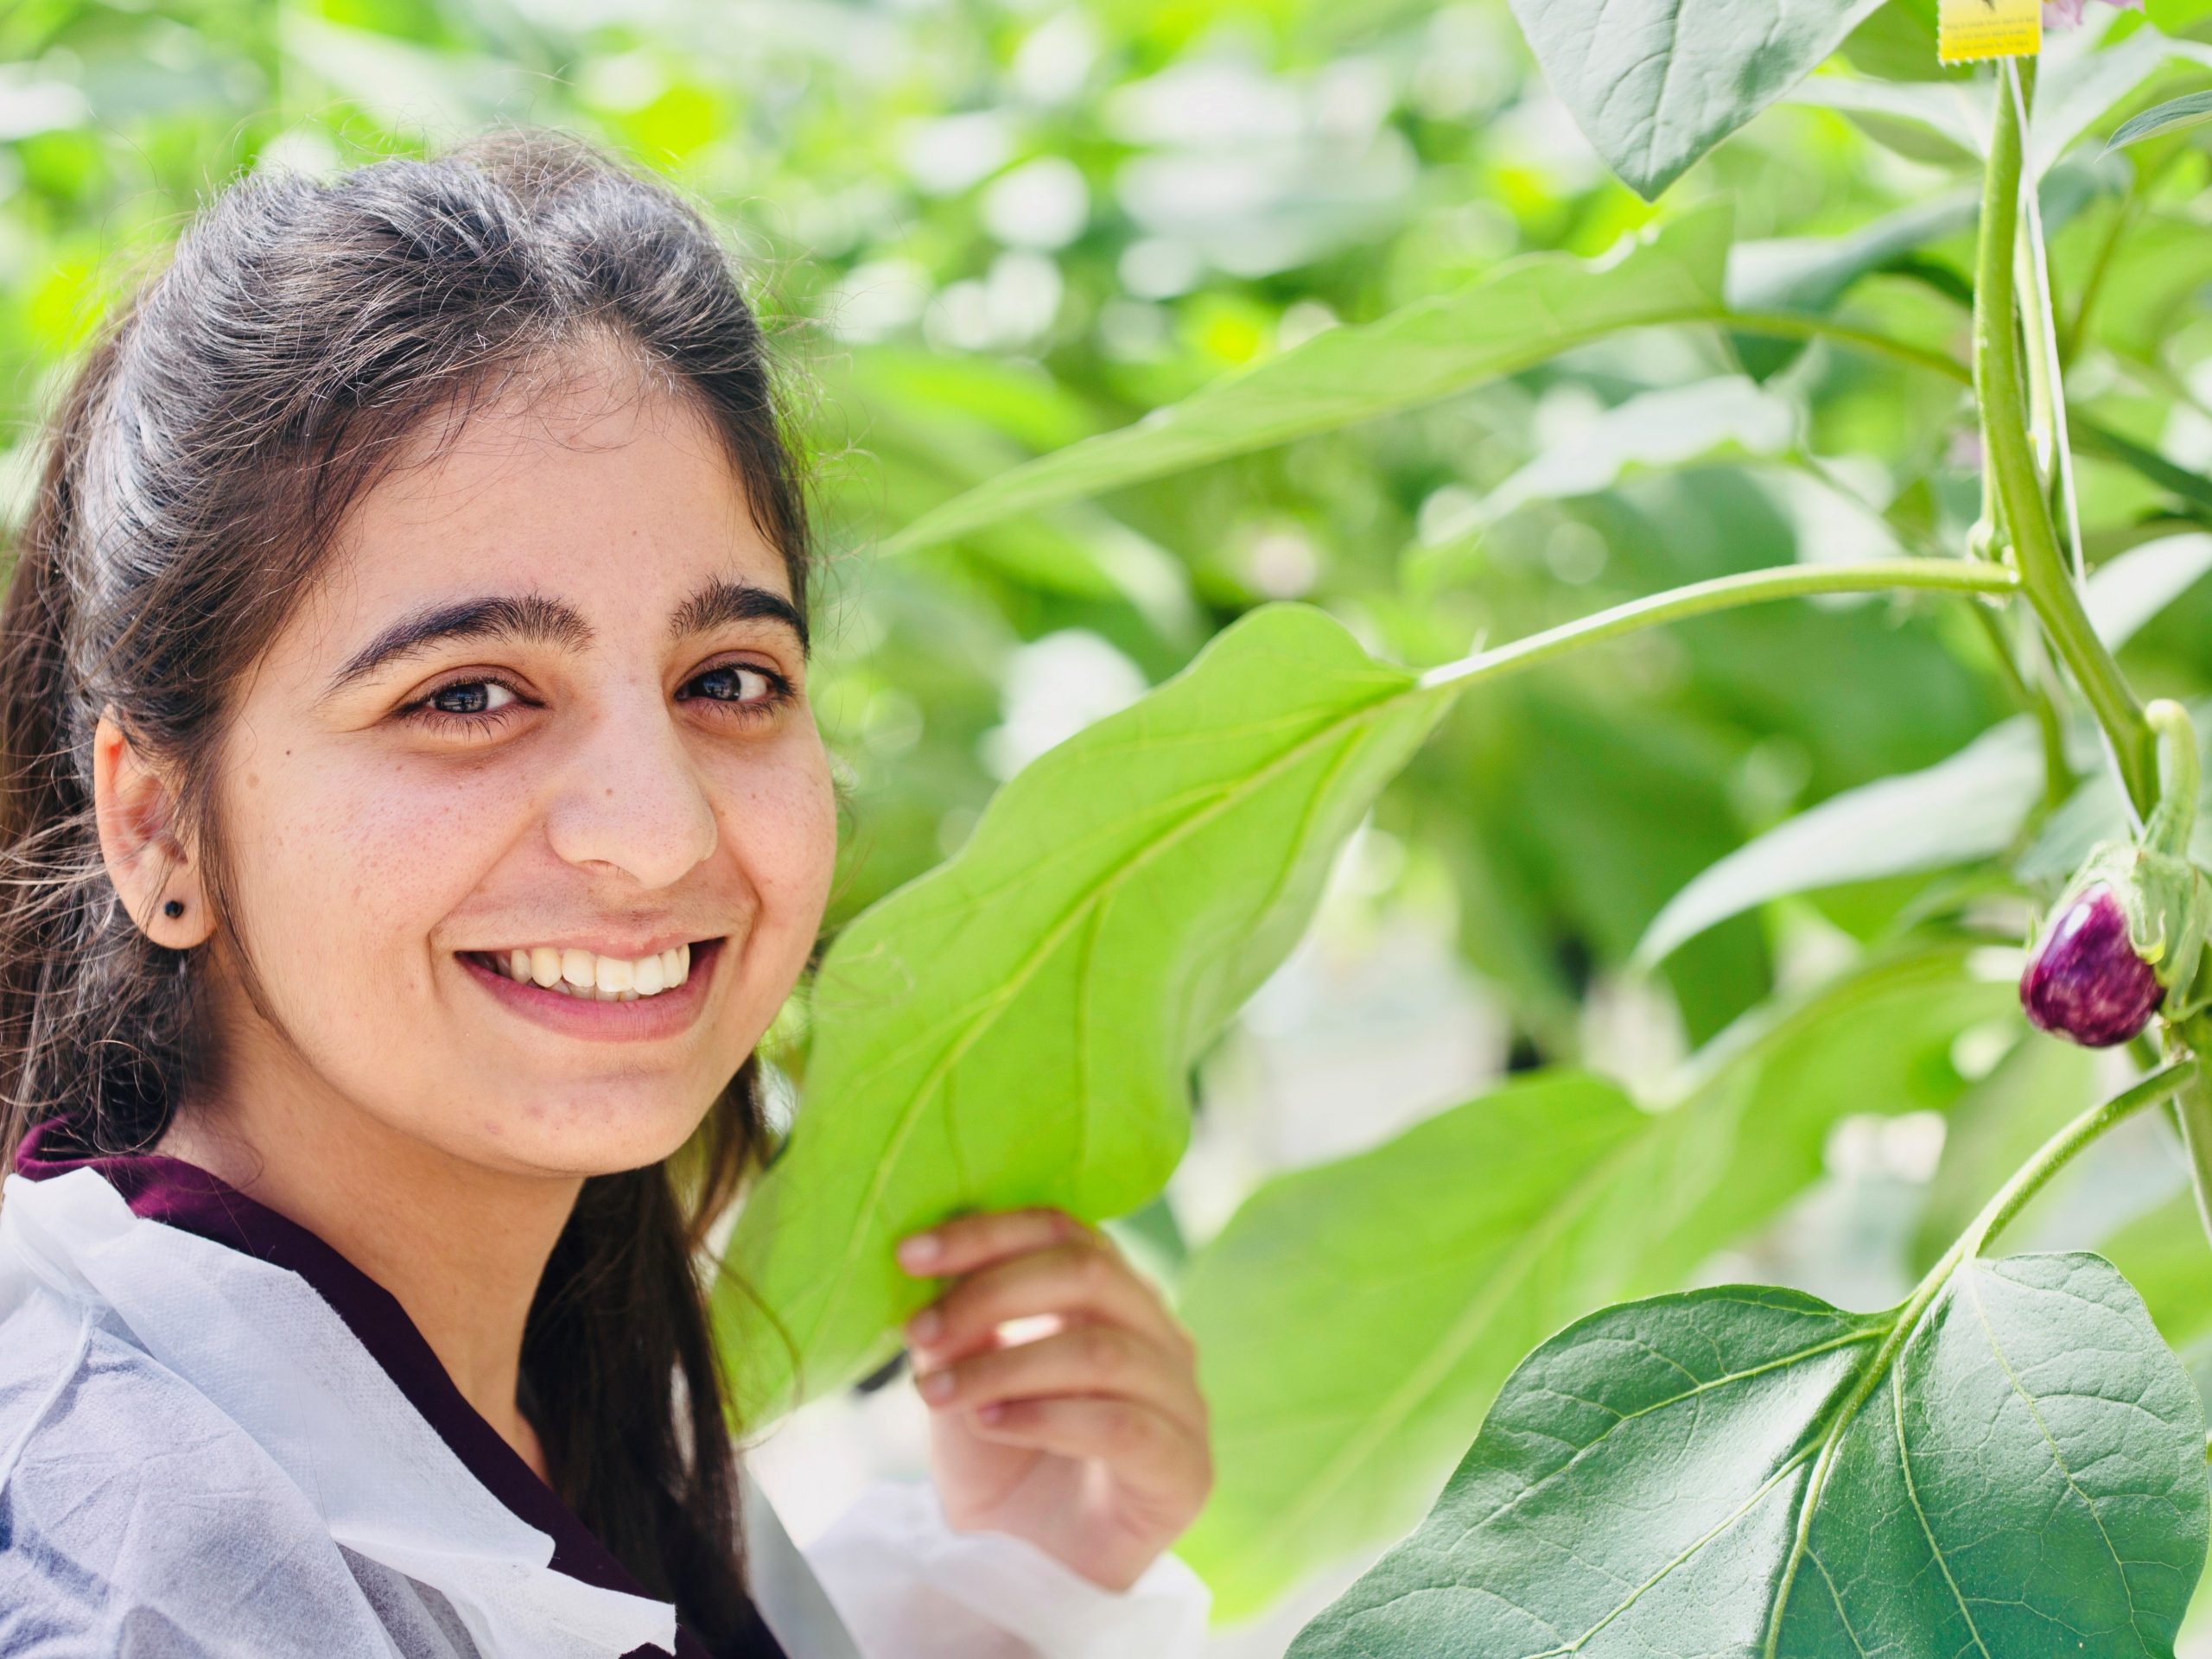 FFSCRC Industry PhD student and Western Sydney University student Sonali Koundal is exploring sustainable ways to fertigate glasshouse-grown vegetable crops for the benefit of growers and the environment.